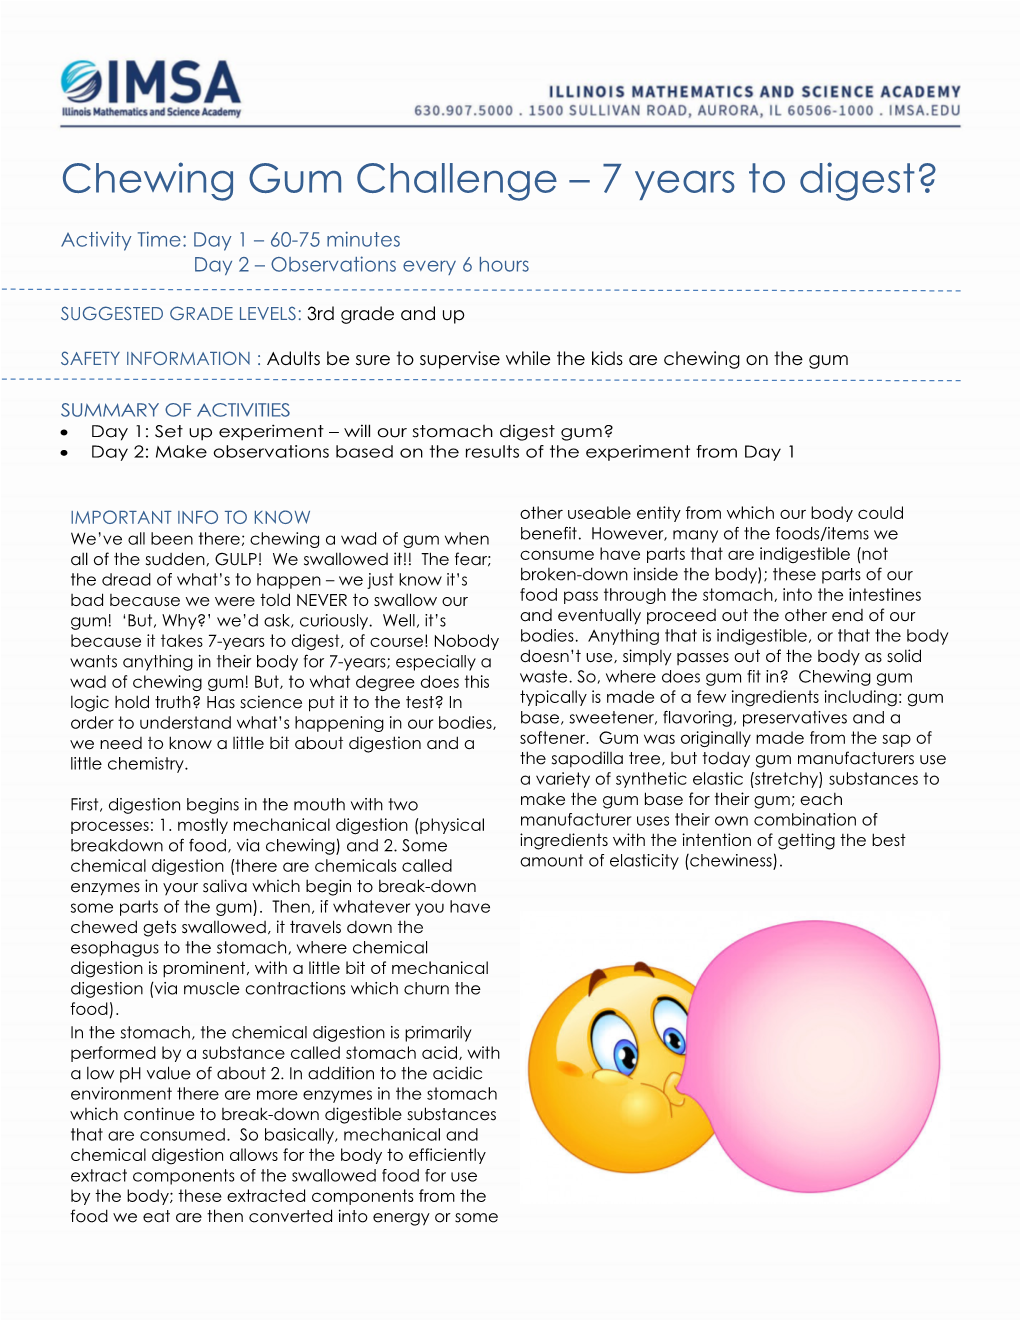 Chewing Gum Challenge – 7 Years to Digest?